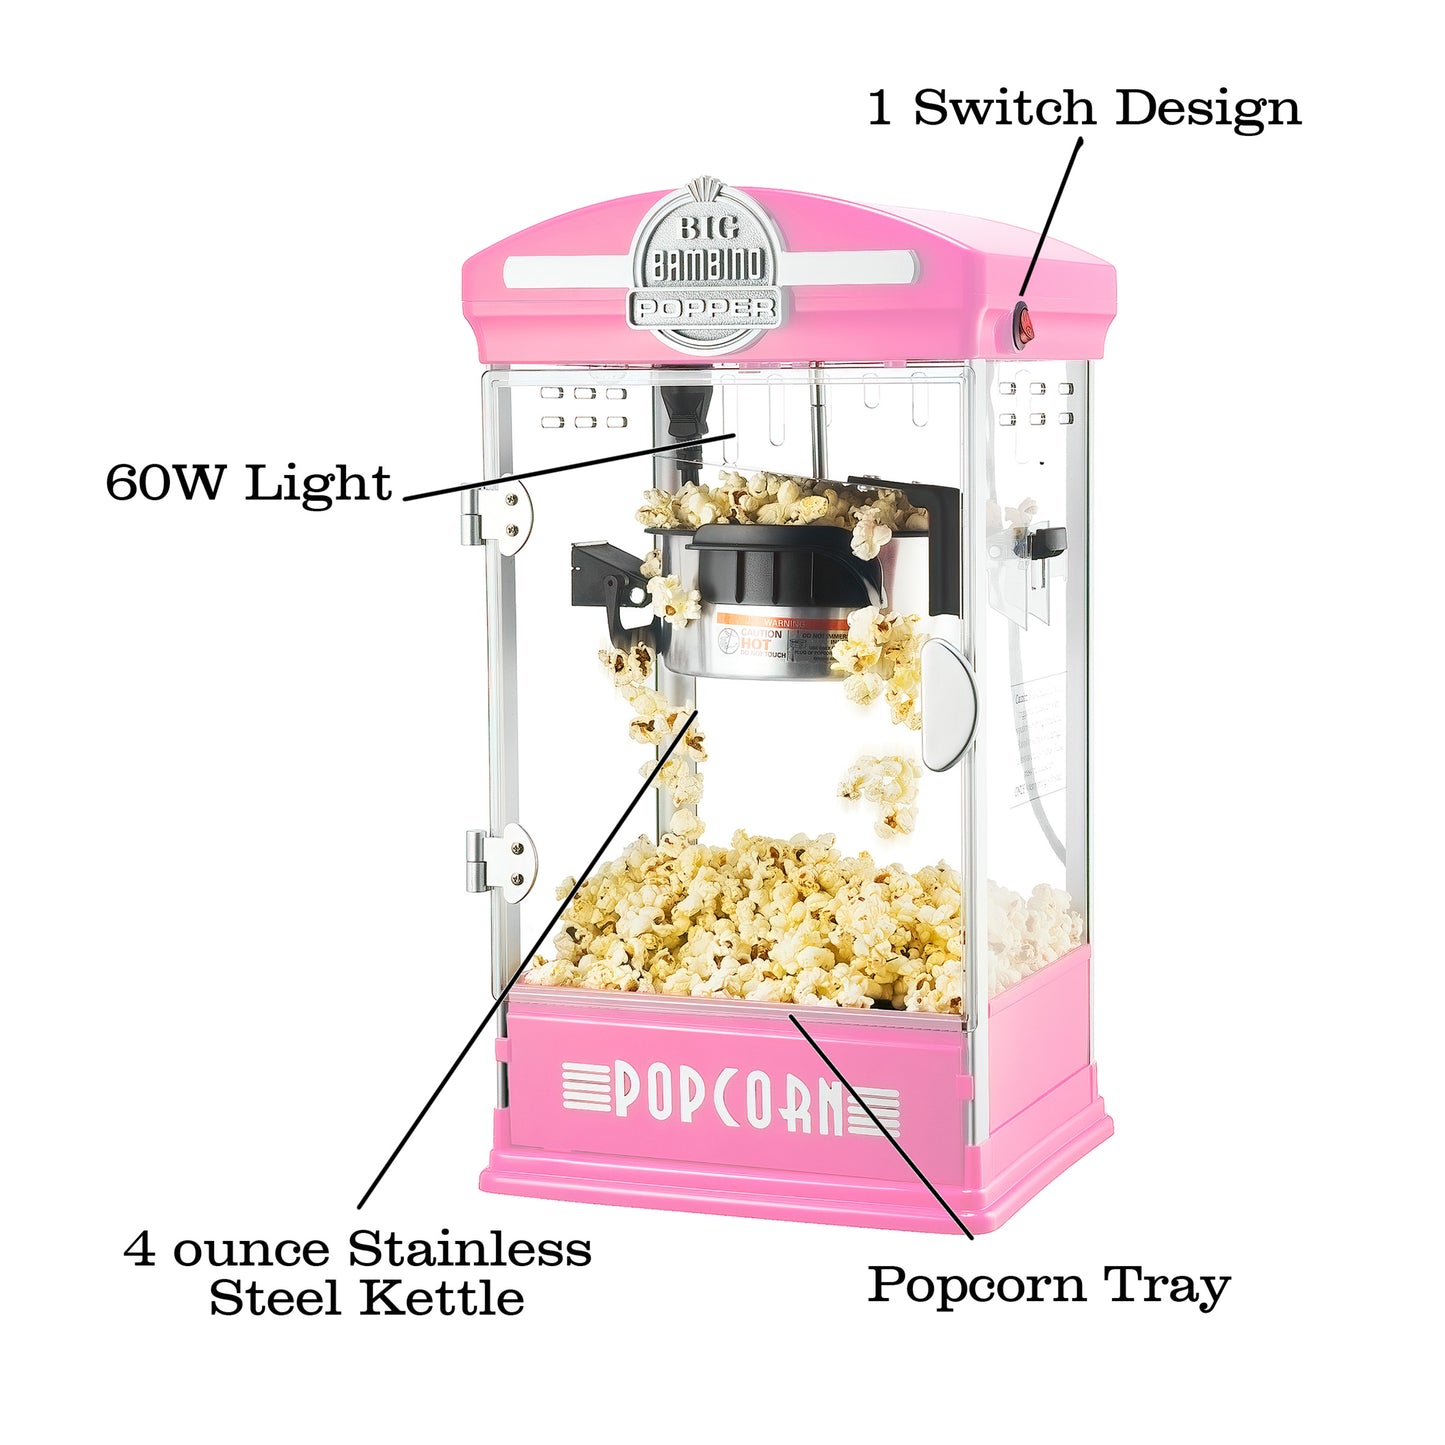 Little Bambino Popcorn Machine with 2.5 Ounce Kettle and 12 Pack of All-In-One Popcorn Kernel Packets - Pink